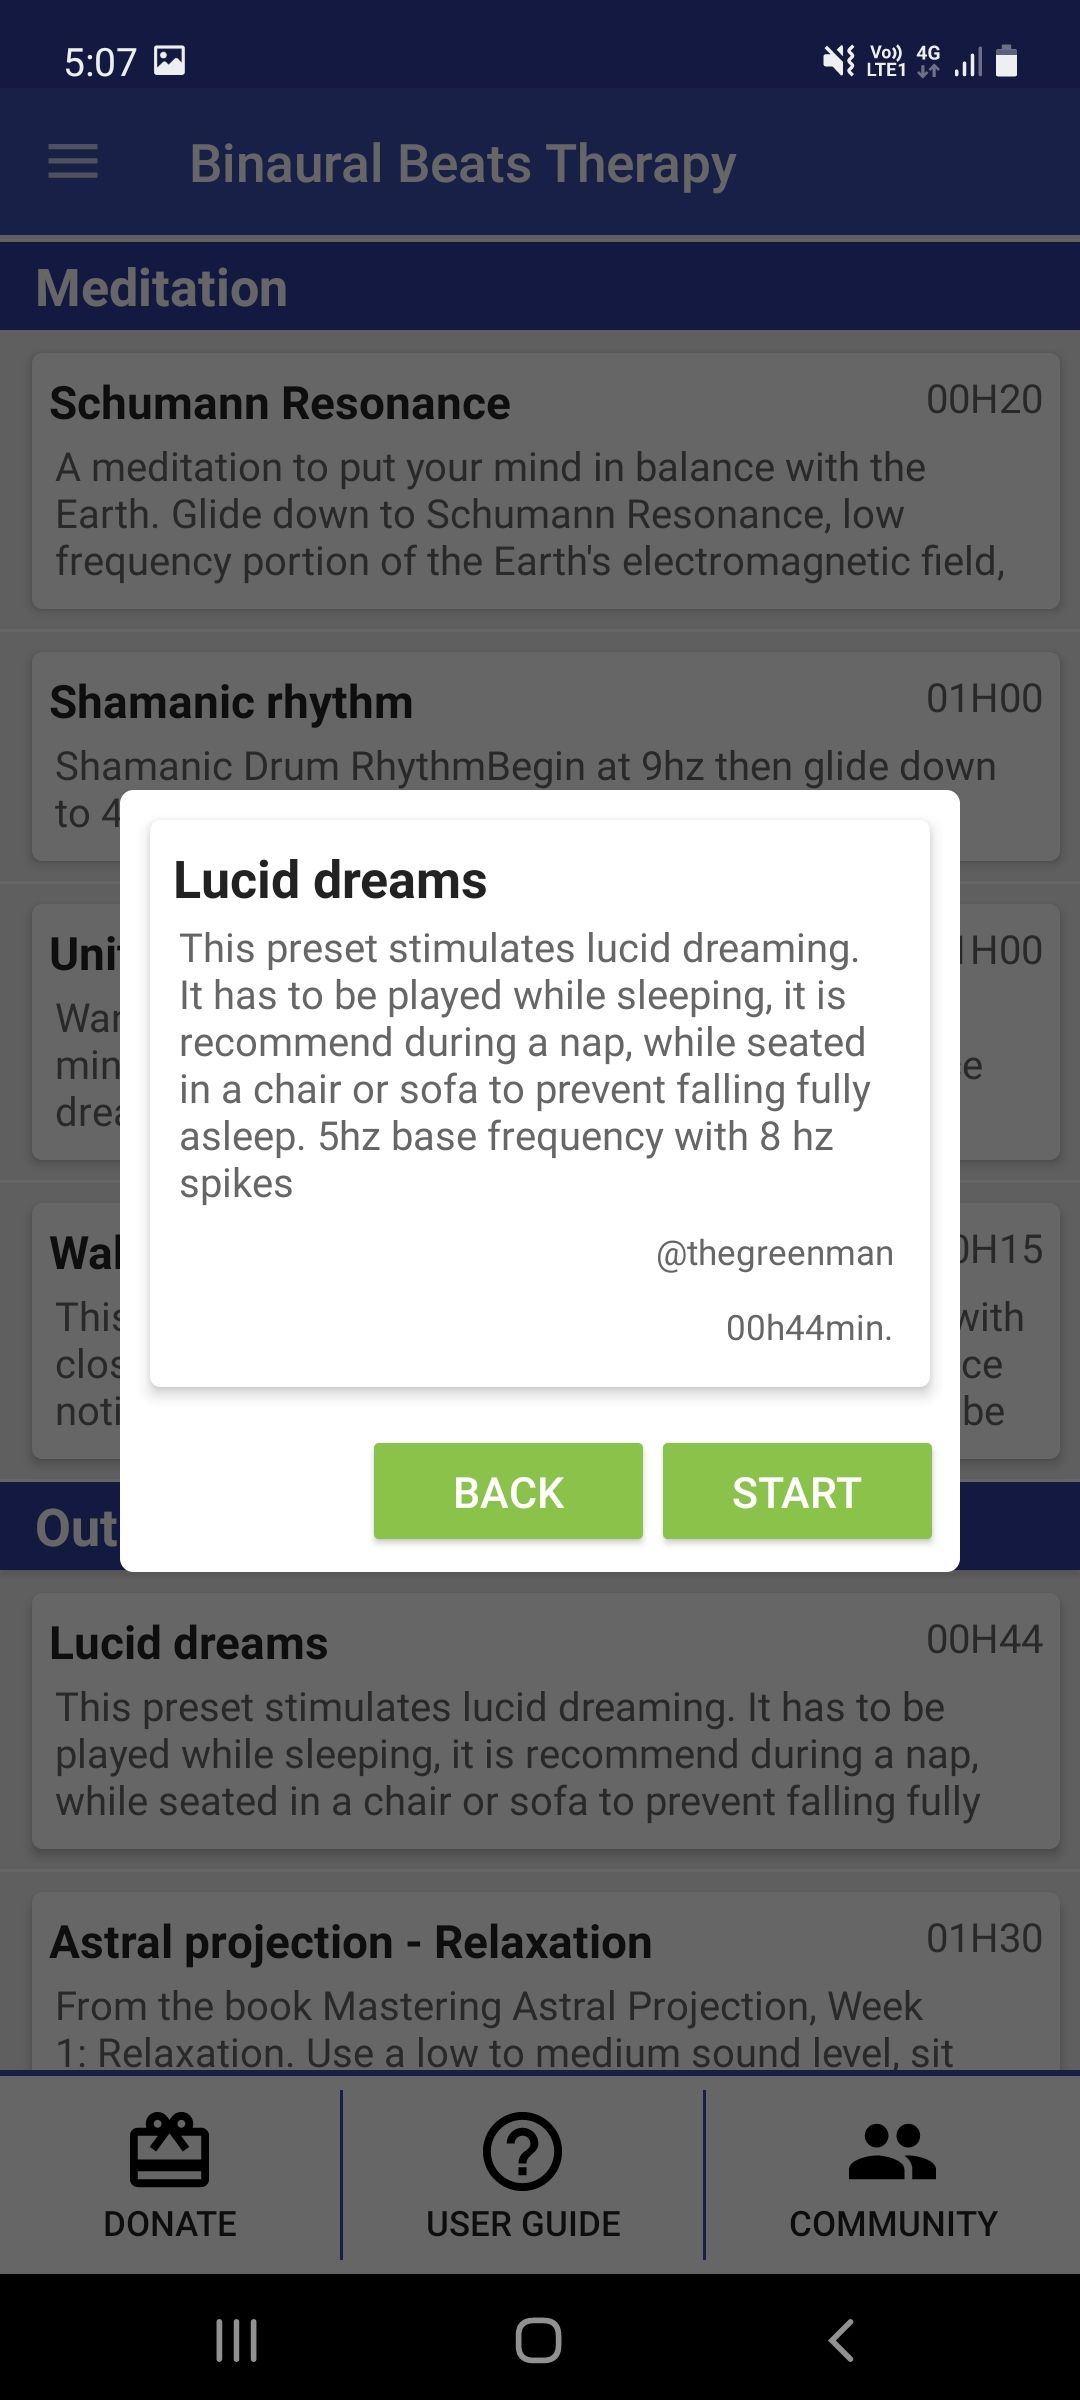 binaural beats therapy app lucid dreams category